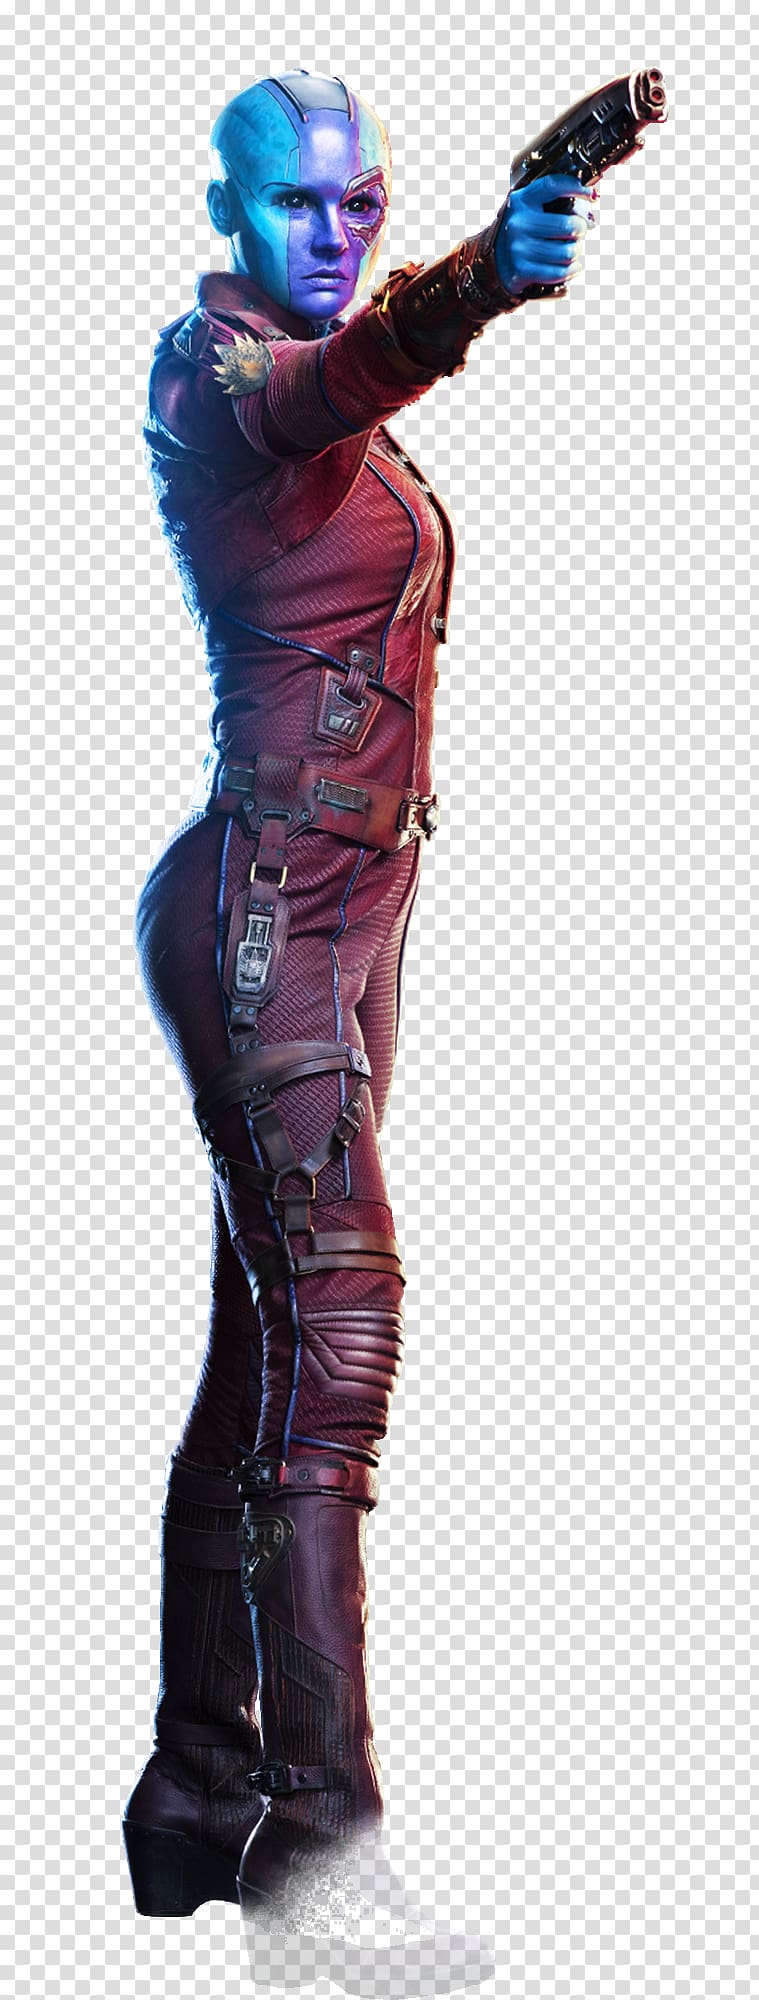 woman in red suit holding gun illustration, Yondu Guardians of the Galaxy Vol. 2 Nebula Star-Lord Gamora, Magneto transparent background PNG clipart